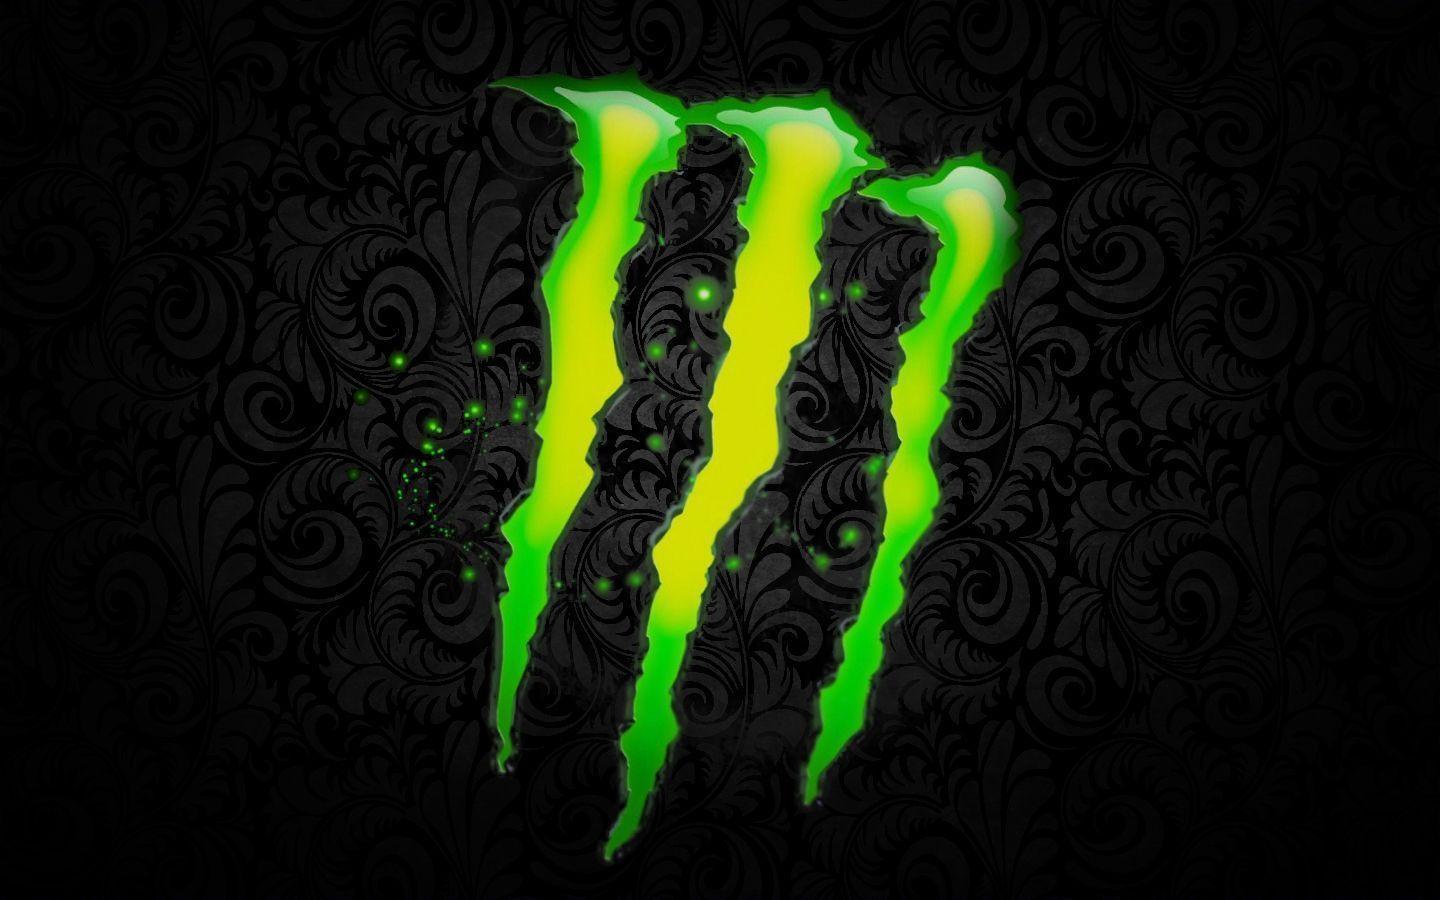 Monster Energy Wallpaper Wallpaper Background of Your Choice